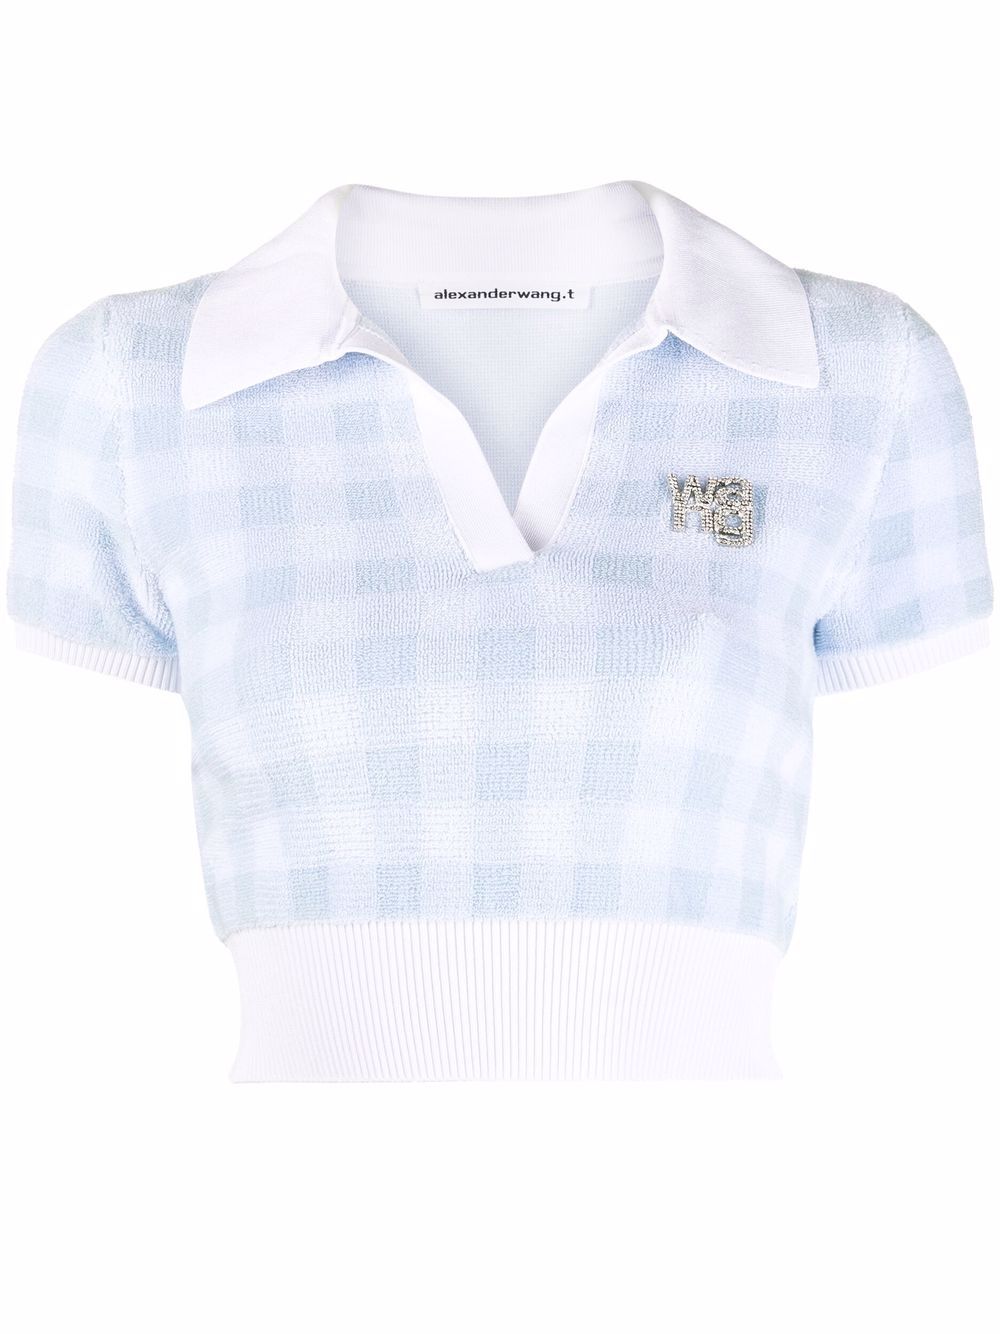 ALEXANDER WANG T LOGO PATCH GINGHAM CHECK CROPPED TOP